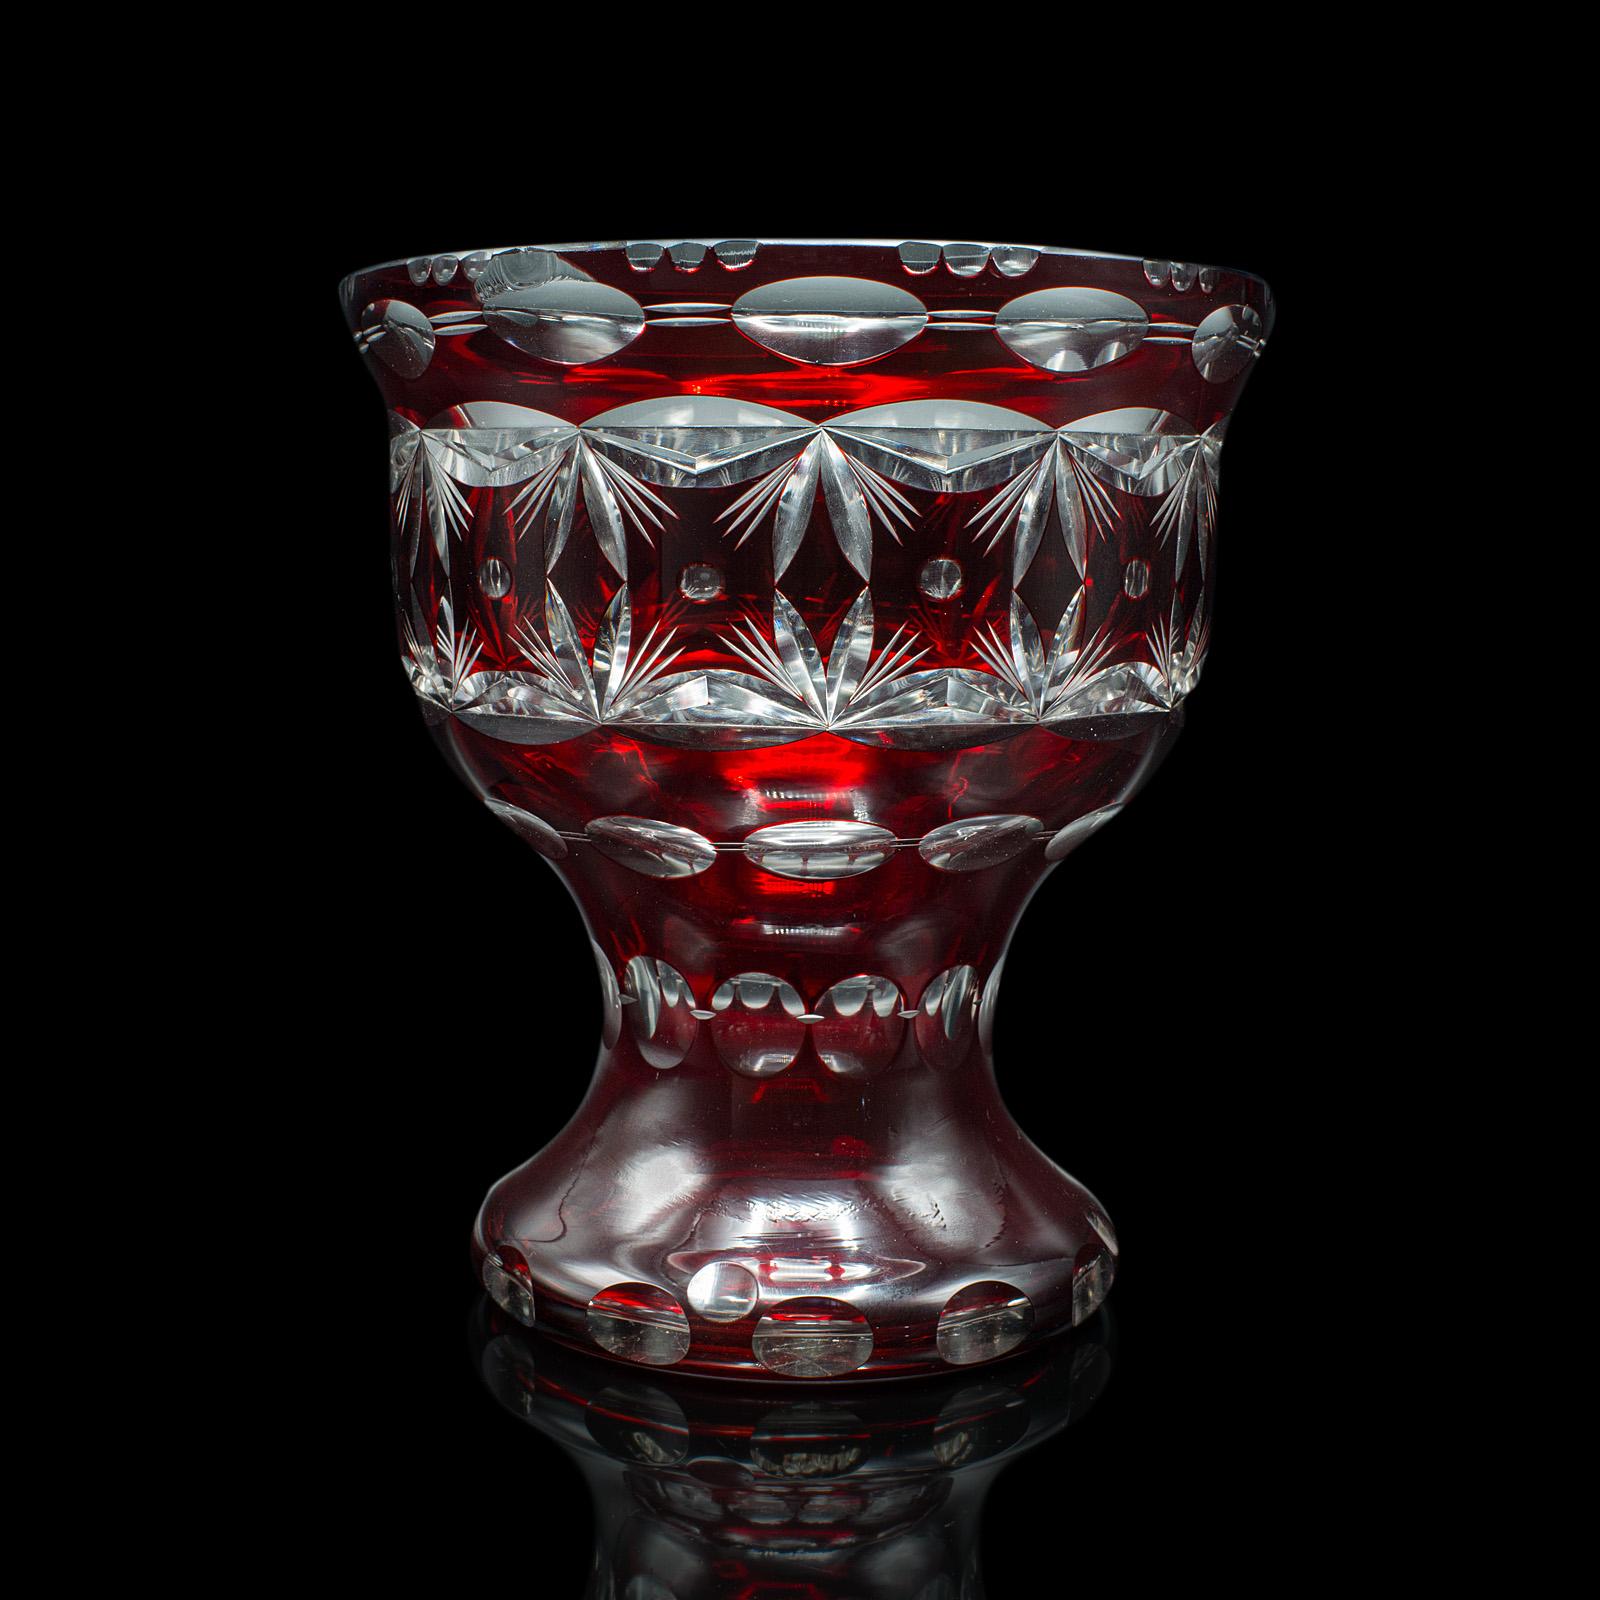 Bohemian Antique Pedestal Bowl, Continental, Red Glass, Decorative Ice Bucket, Circa 1920 For Sale